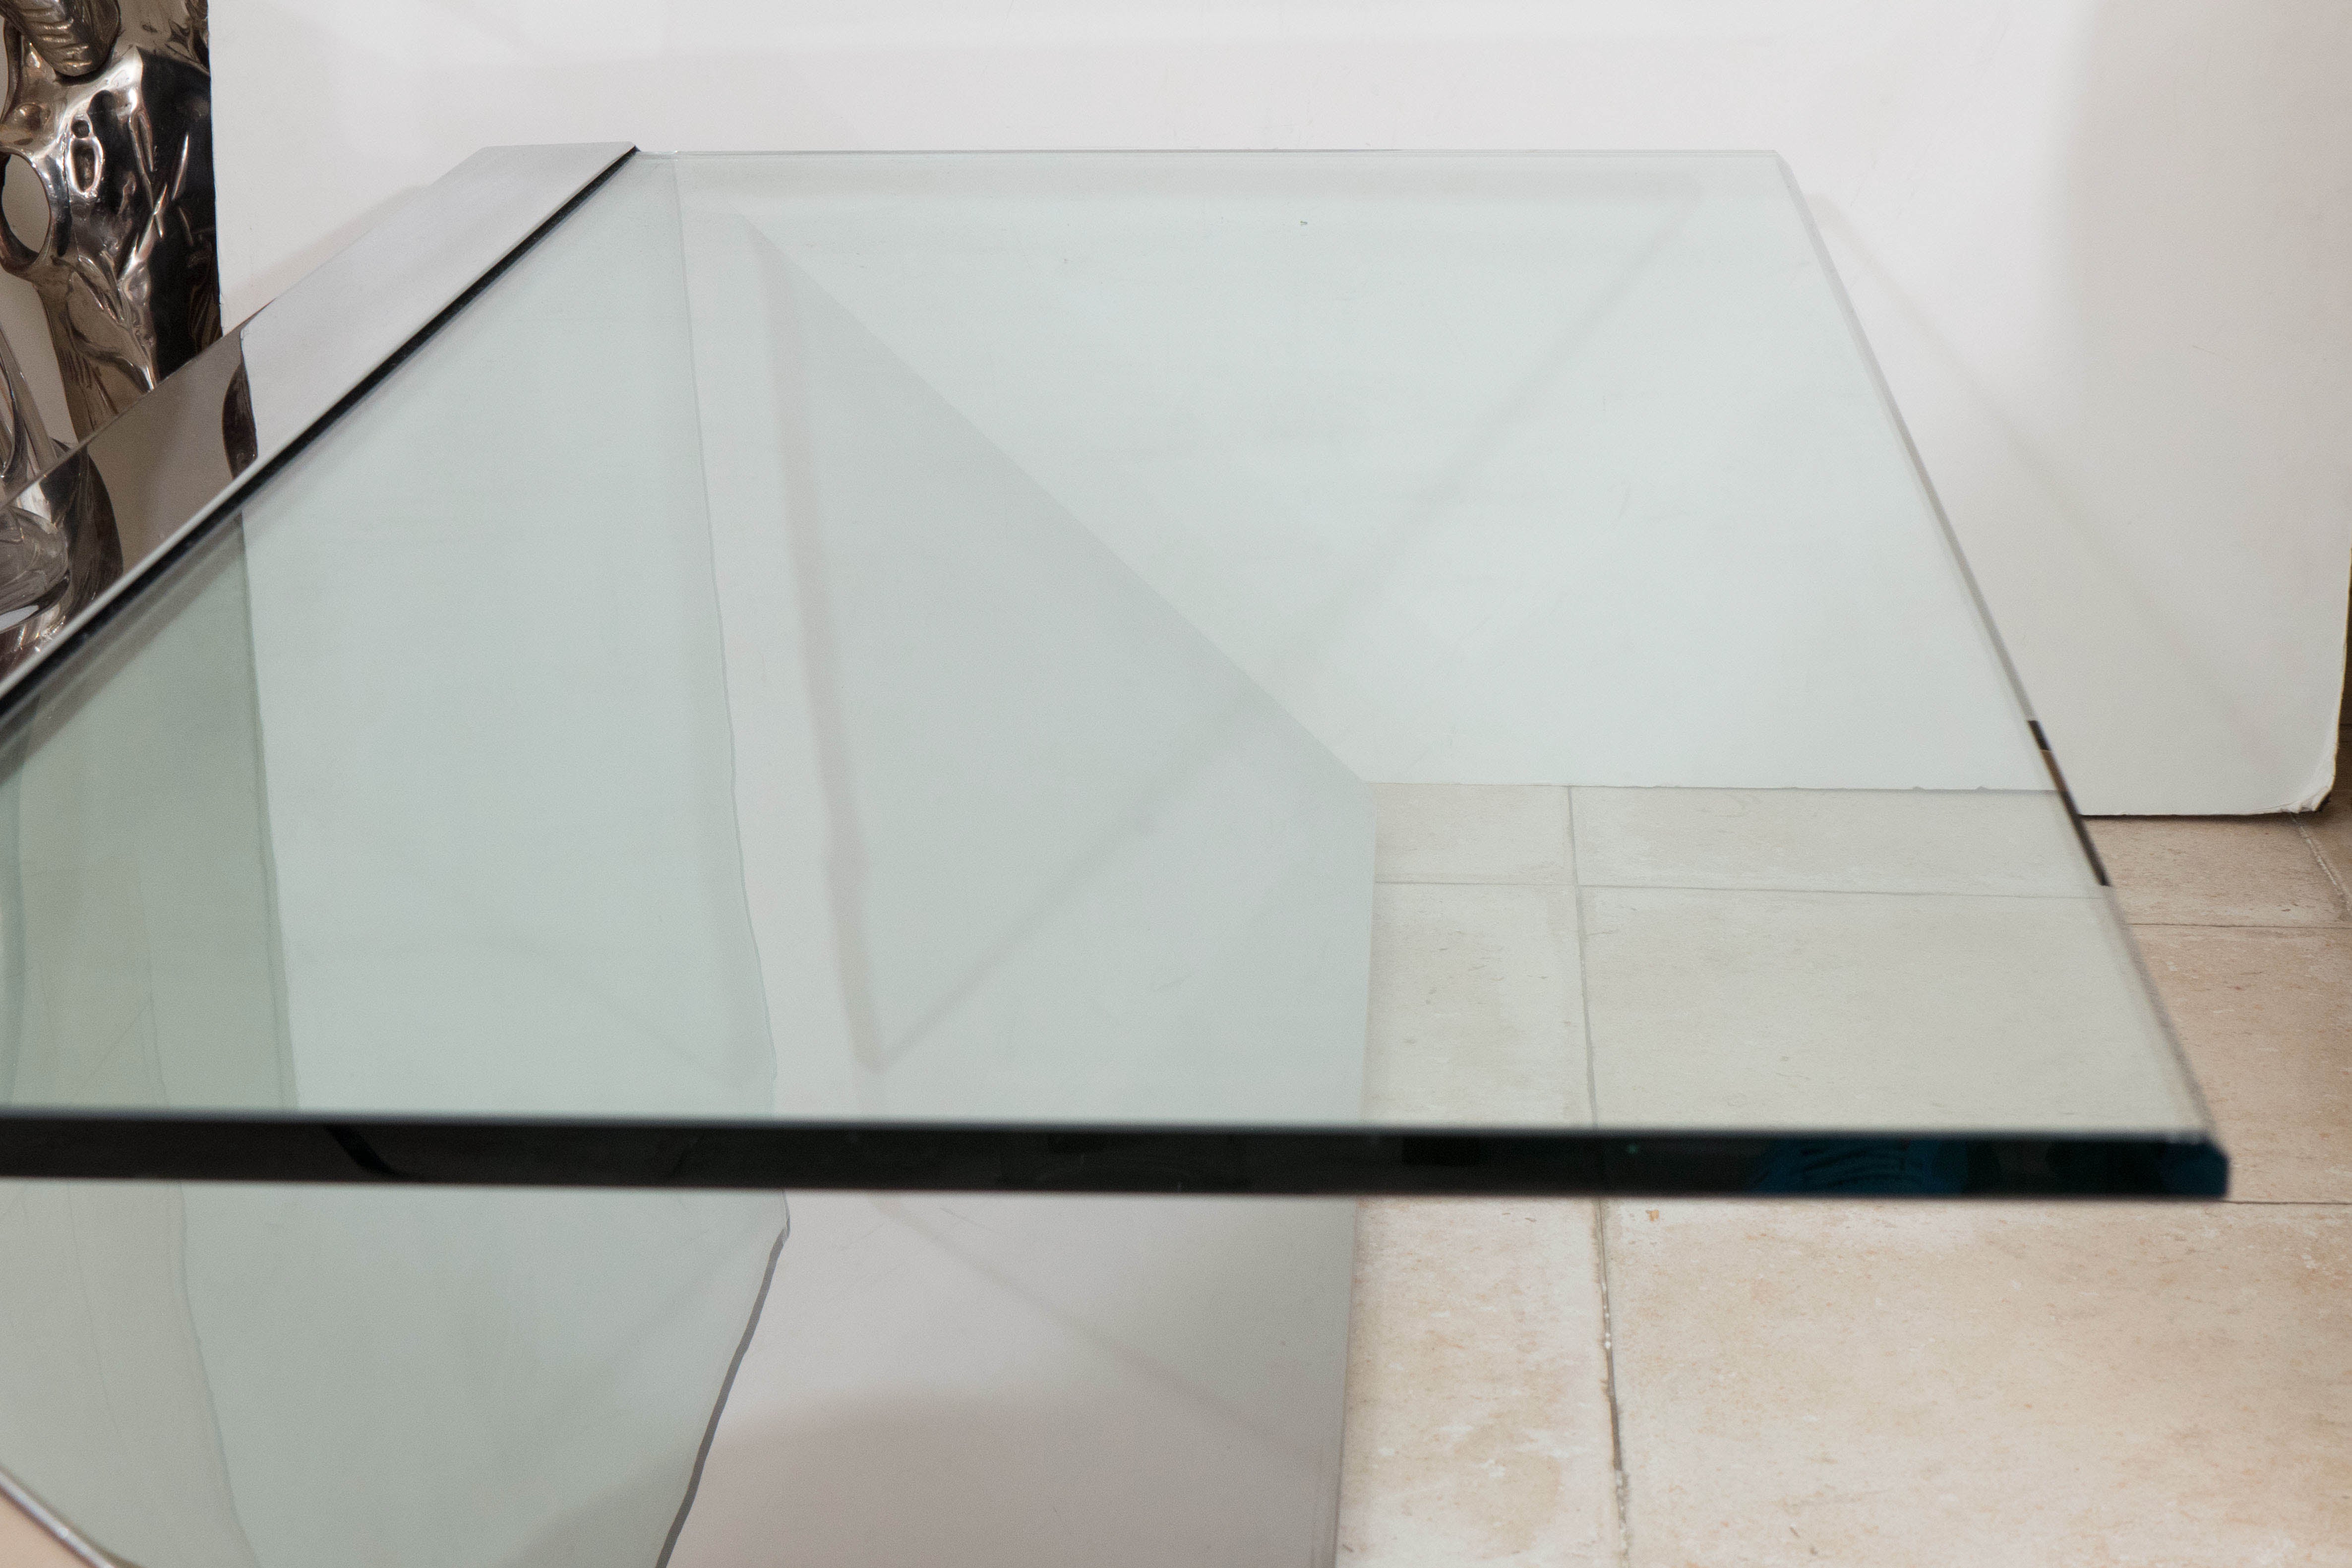 Cantilevered stainless steel coffee table with glass top by J. Wade Beam for Brueton.